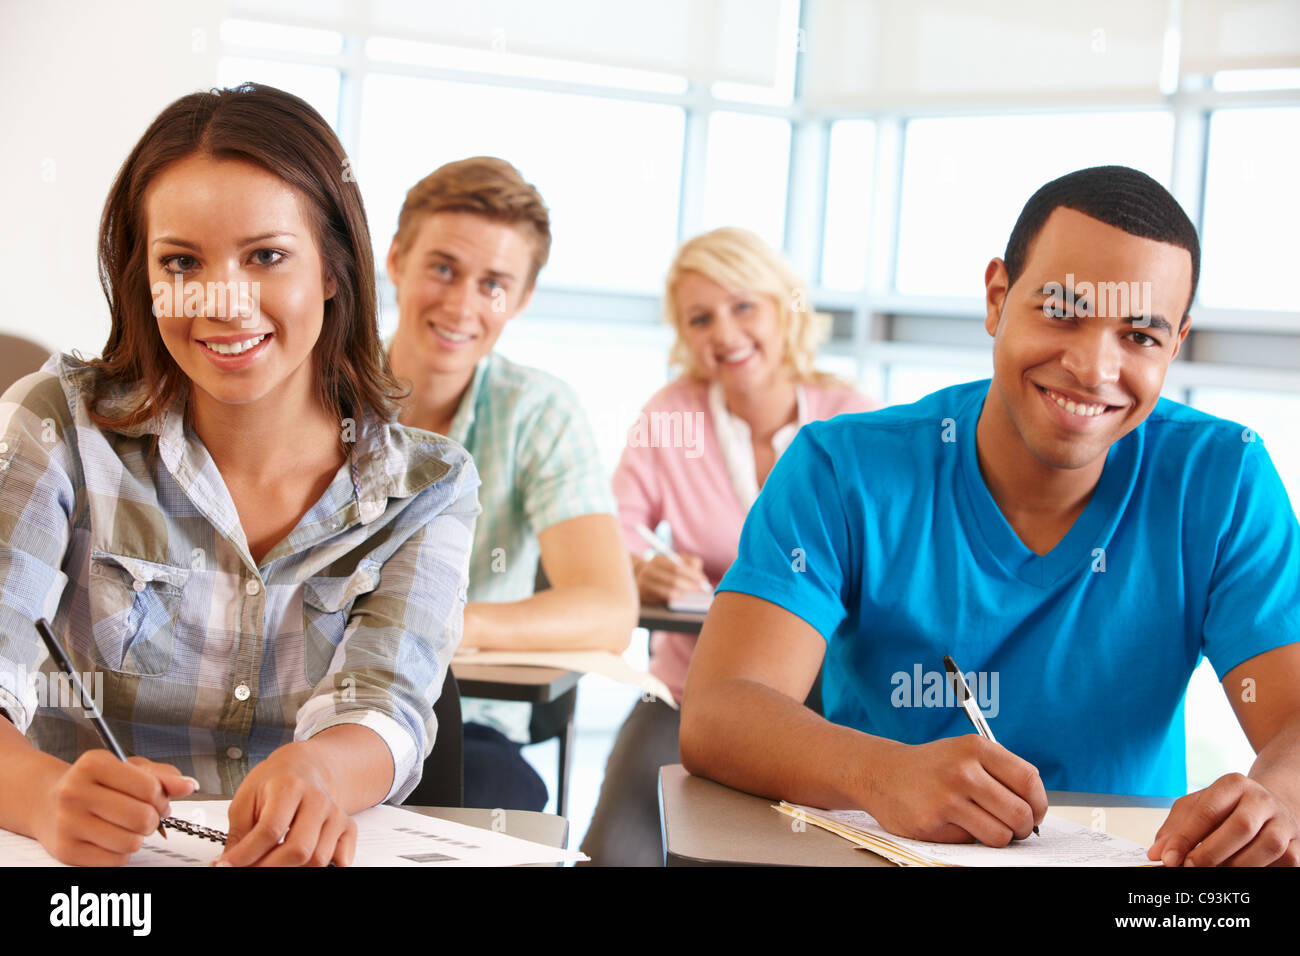 Students working in classroom Stock Photo